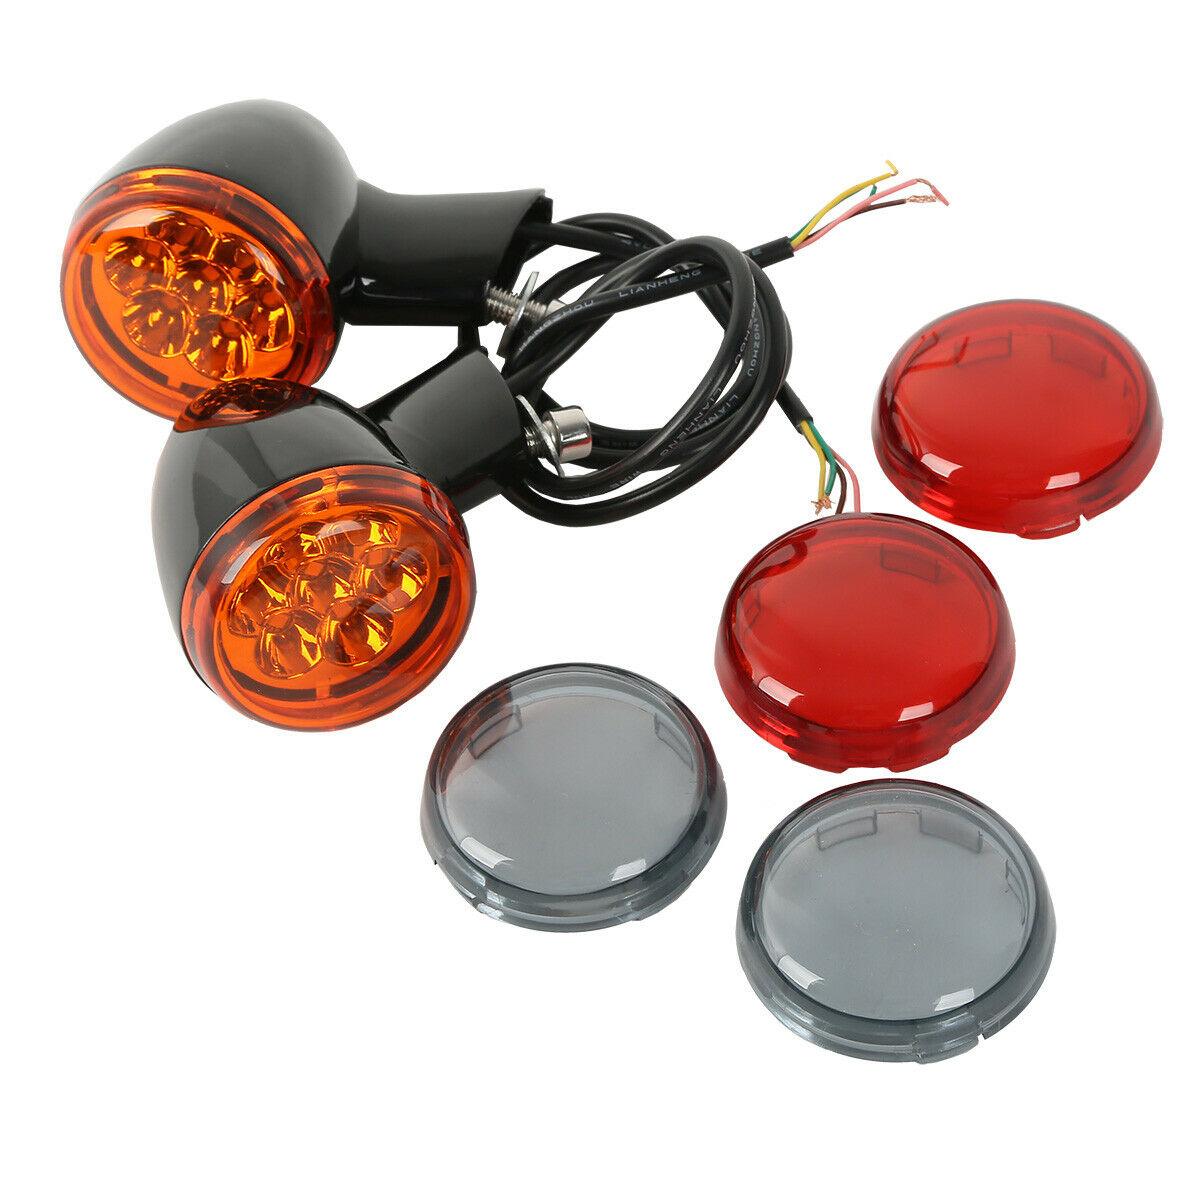 Rear LED Turn Signals Lights Bracket Fit For Harley Sportster XL Custom 92-22 US - Moto Life Products